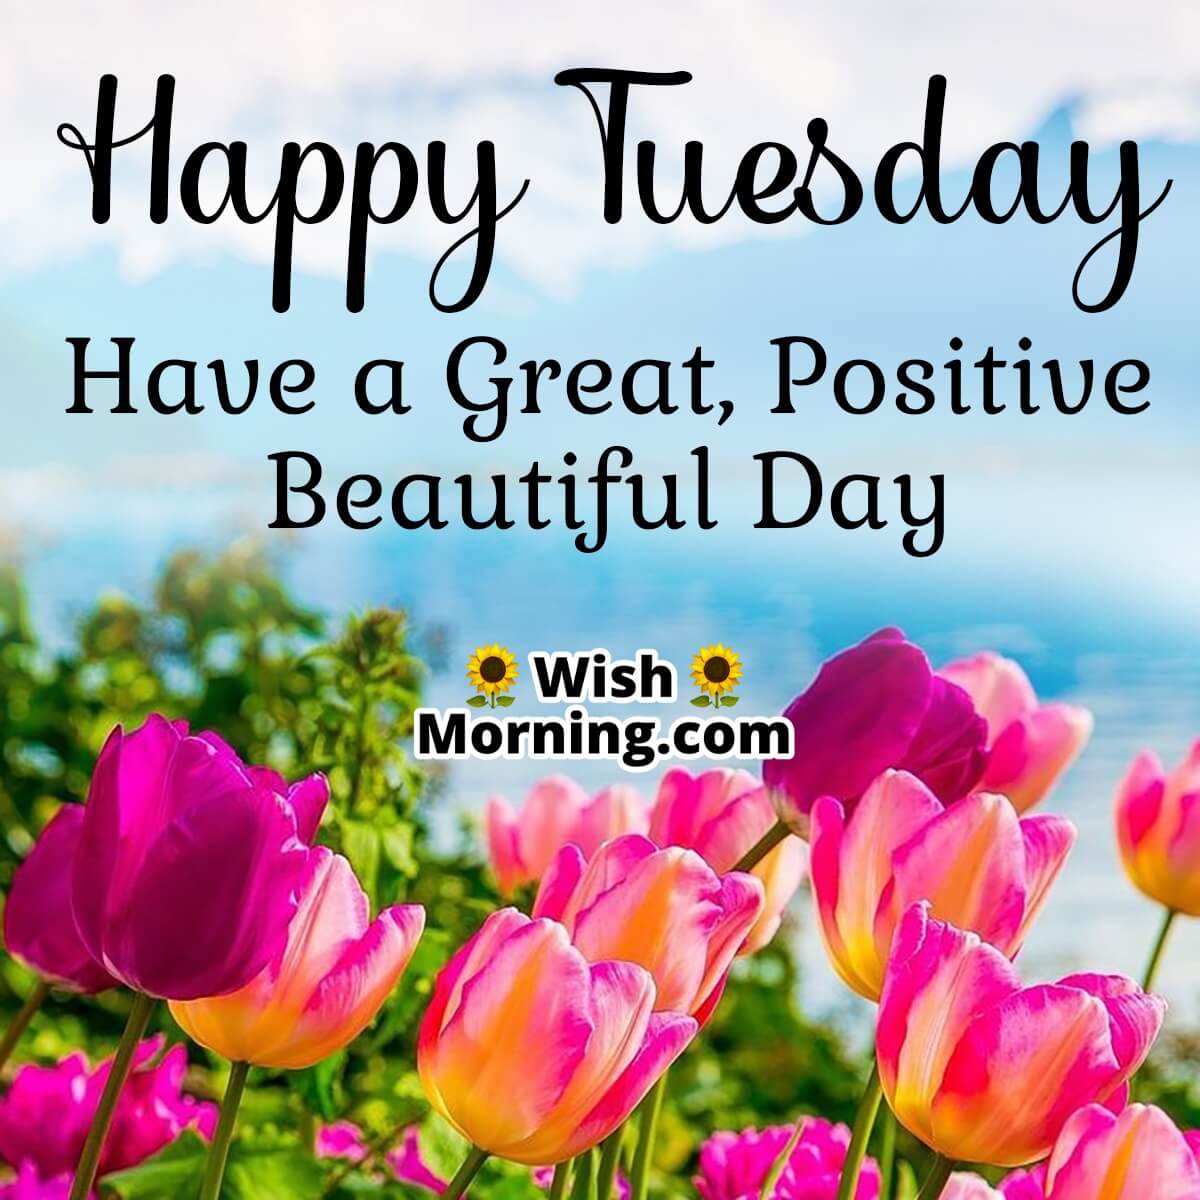 Happy Tuesday Have A Great, Positive, Beautiful Day